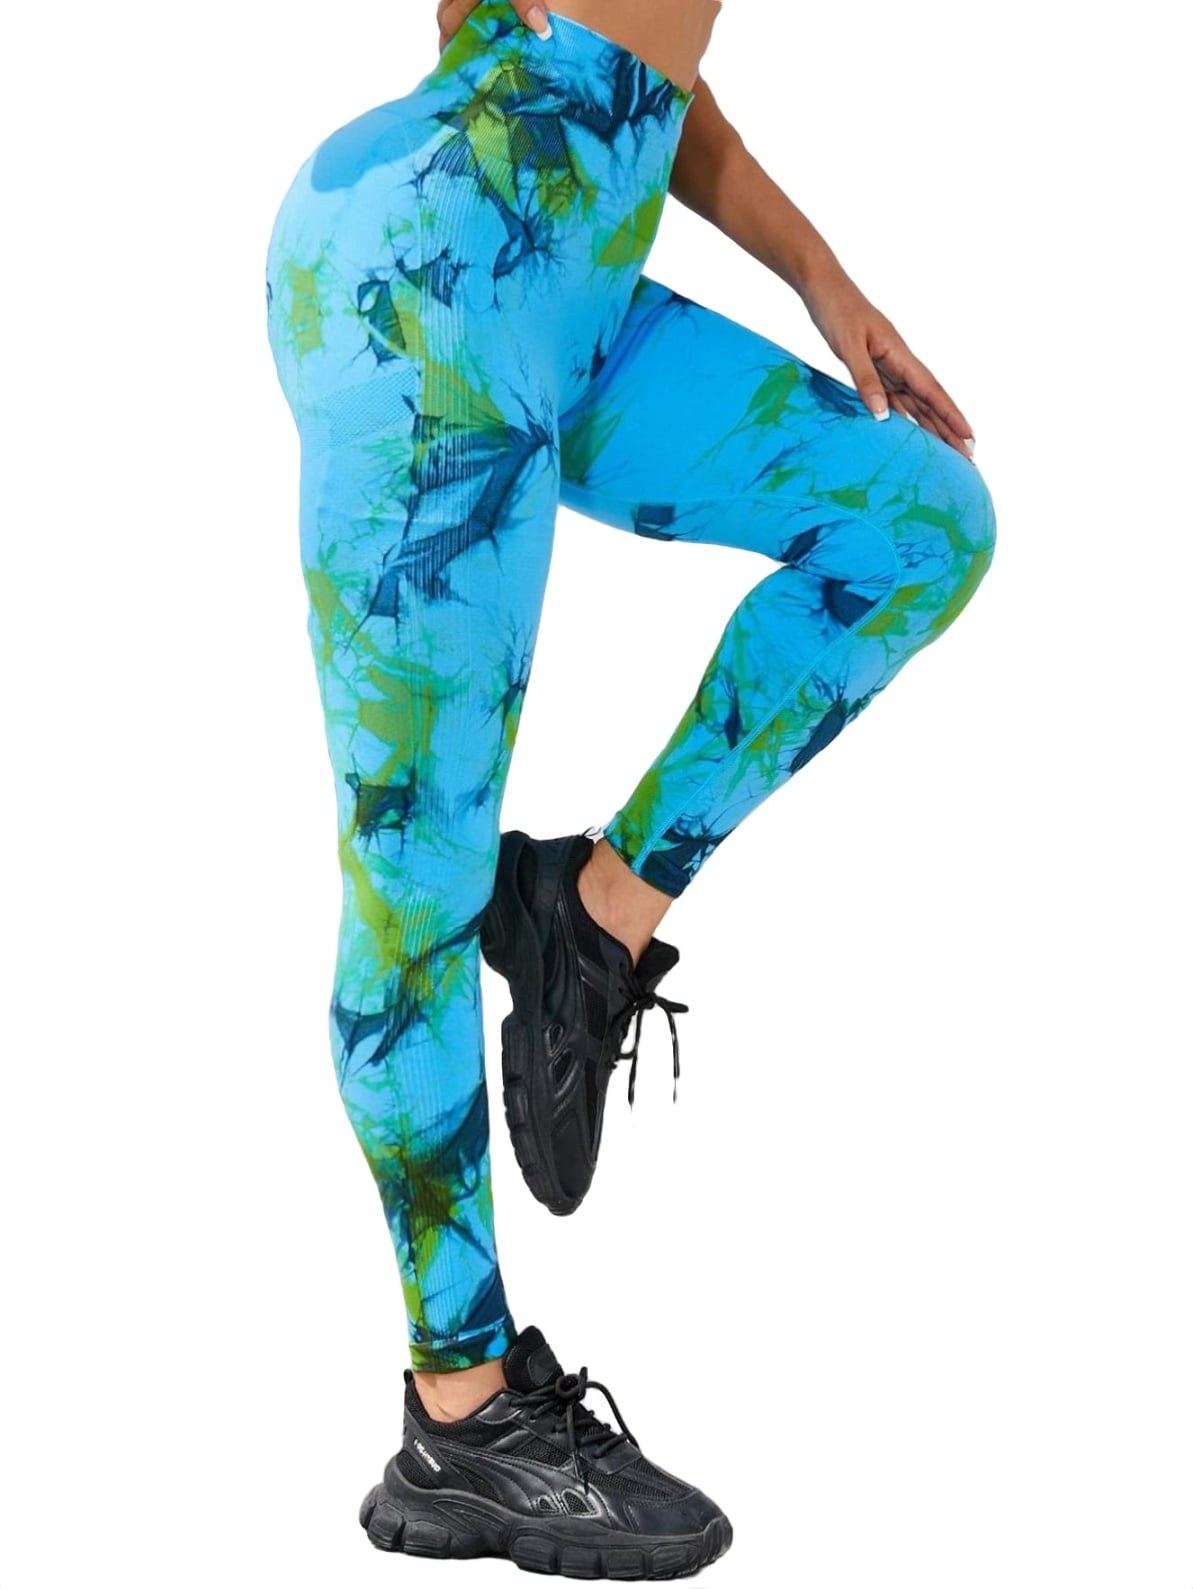 Gently Used Women's ATHLETIC Blue/Green Tie Dye Activewear Capris, Size  Large